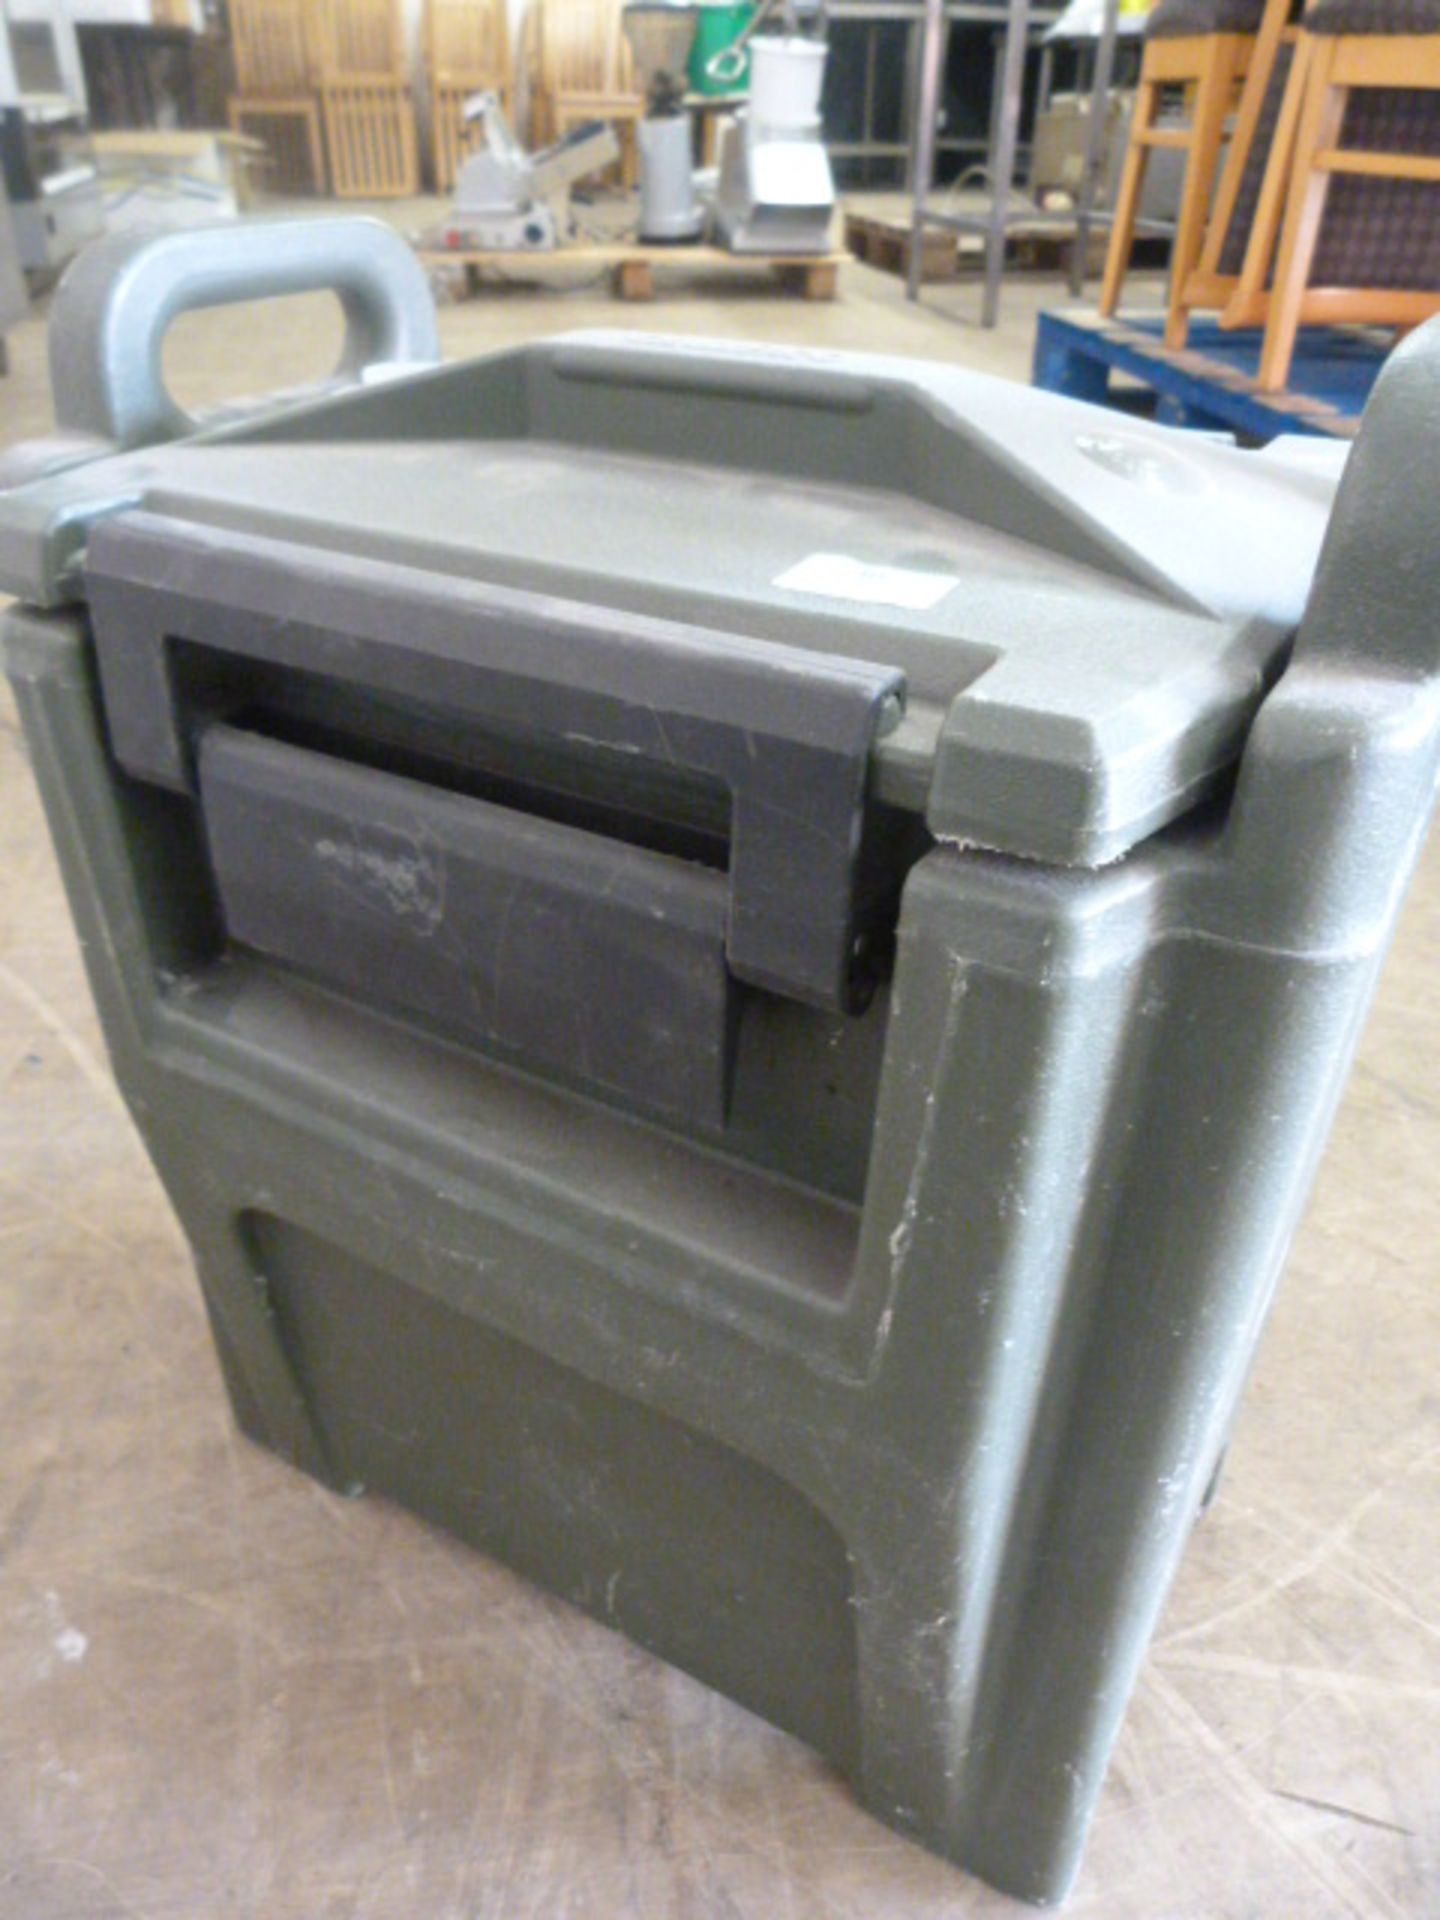 Ex Army Camero Insulated Water Urn